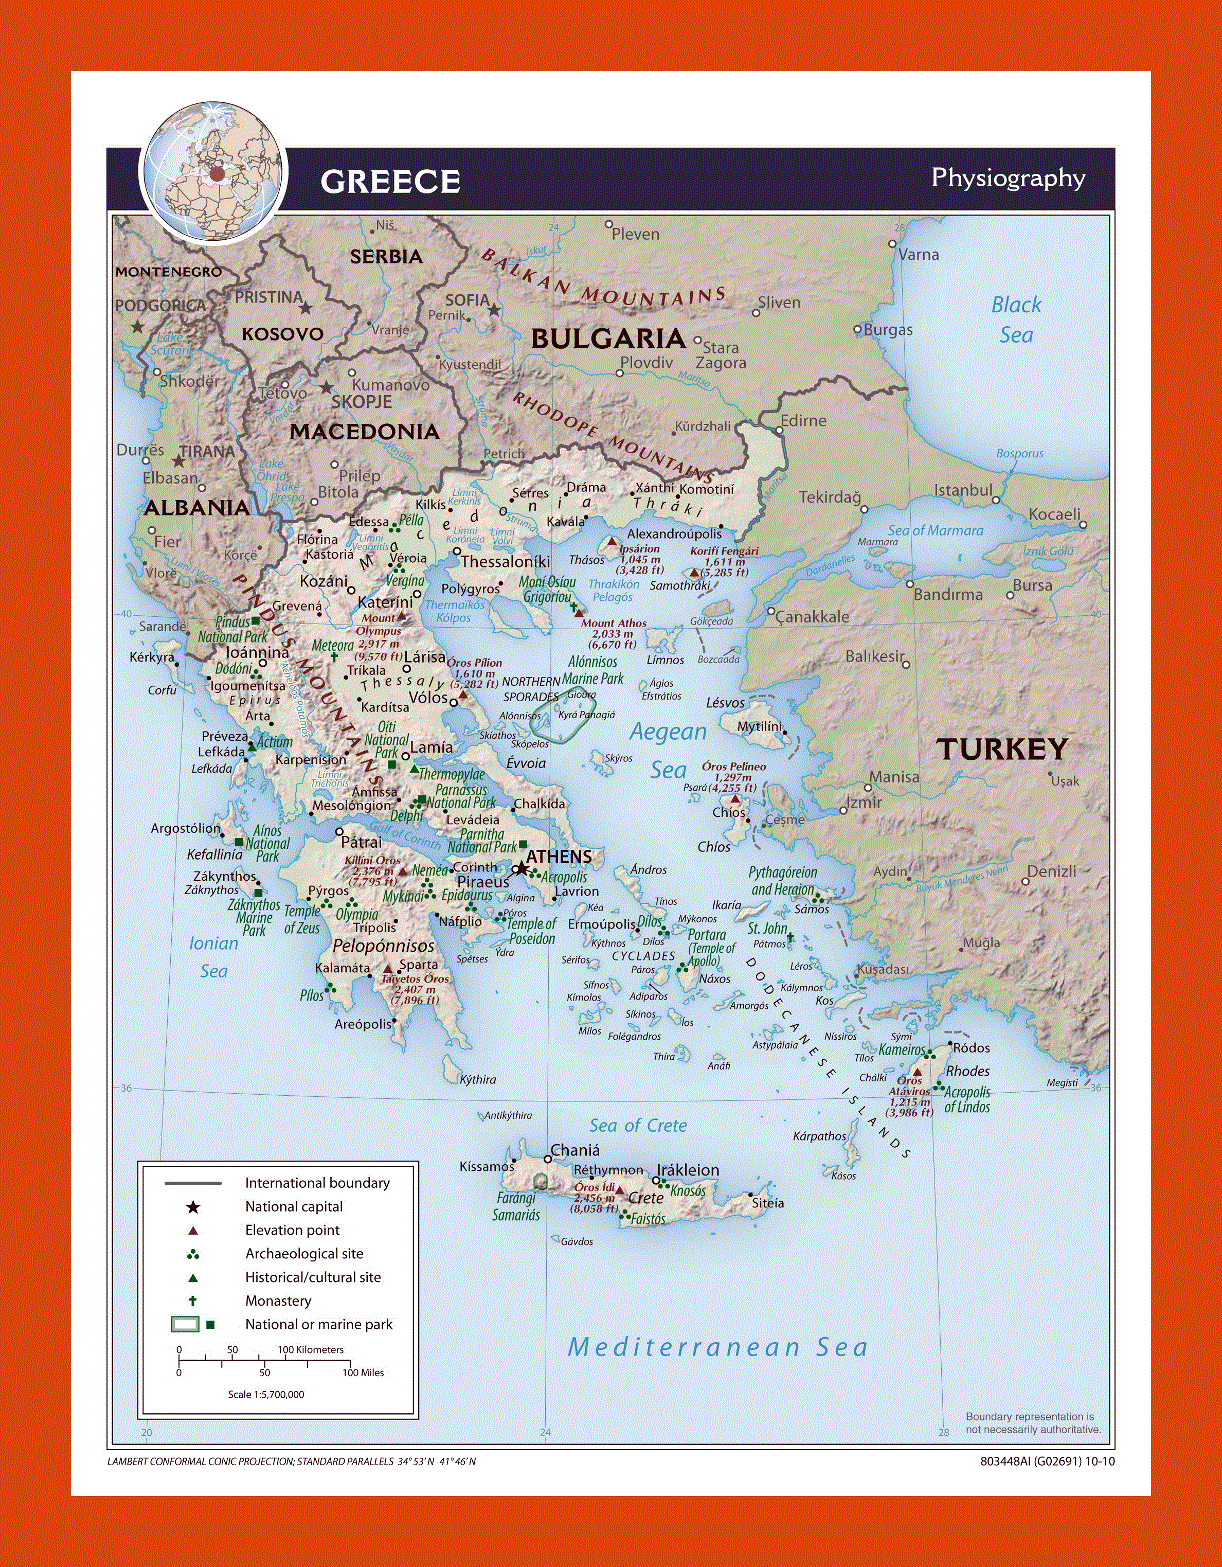 Physiography map of Greece - 2010